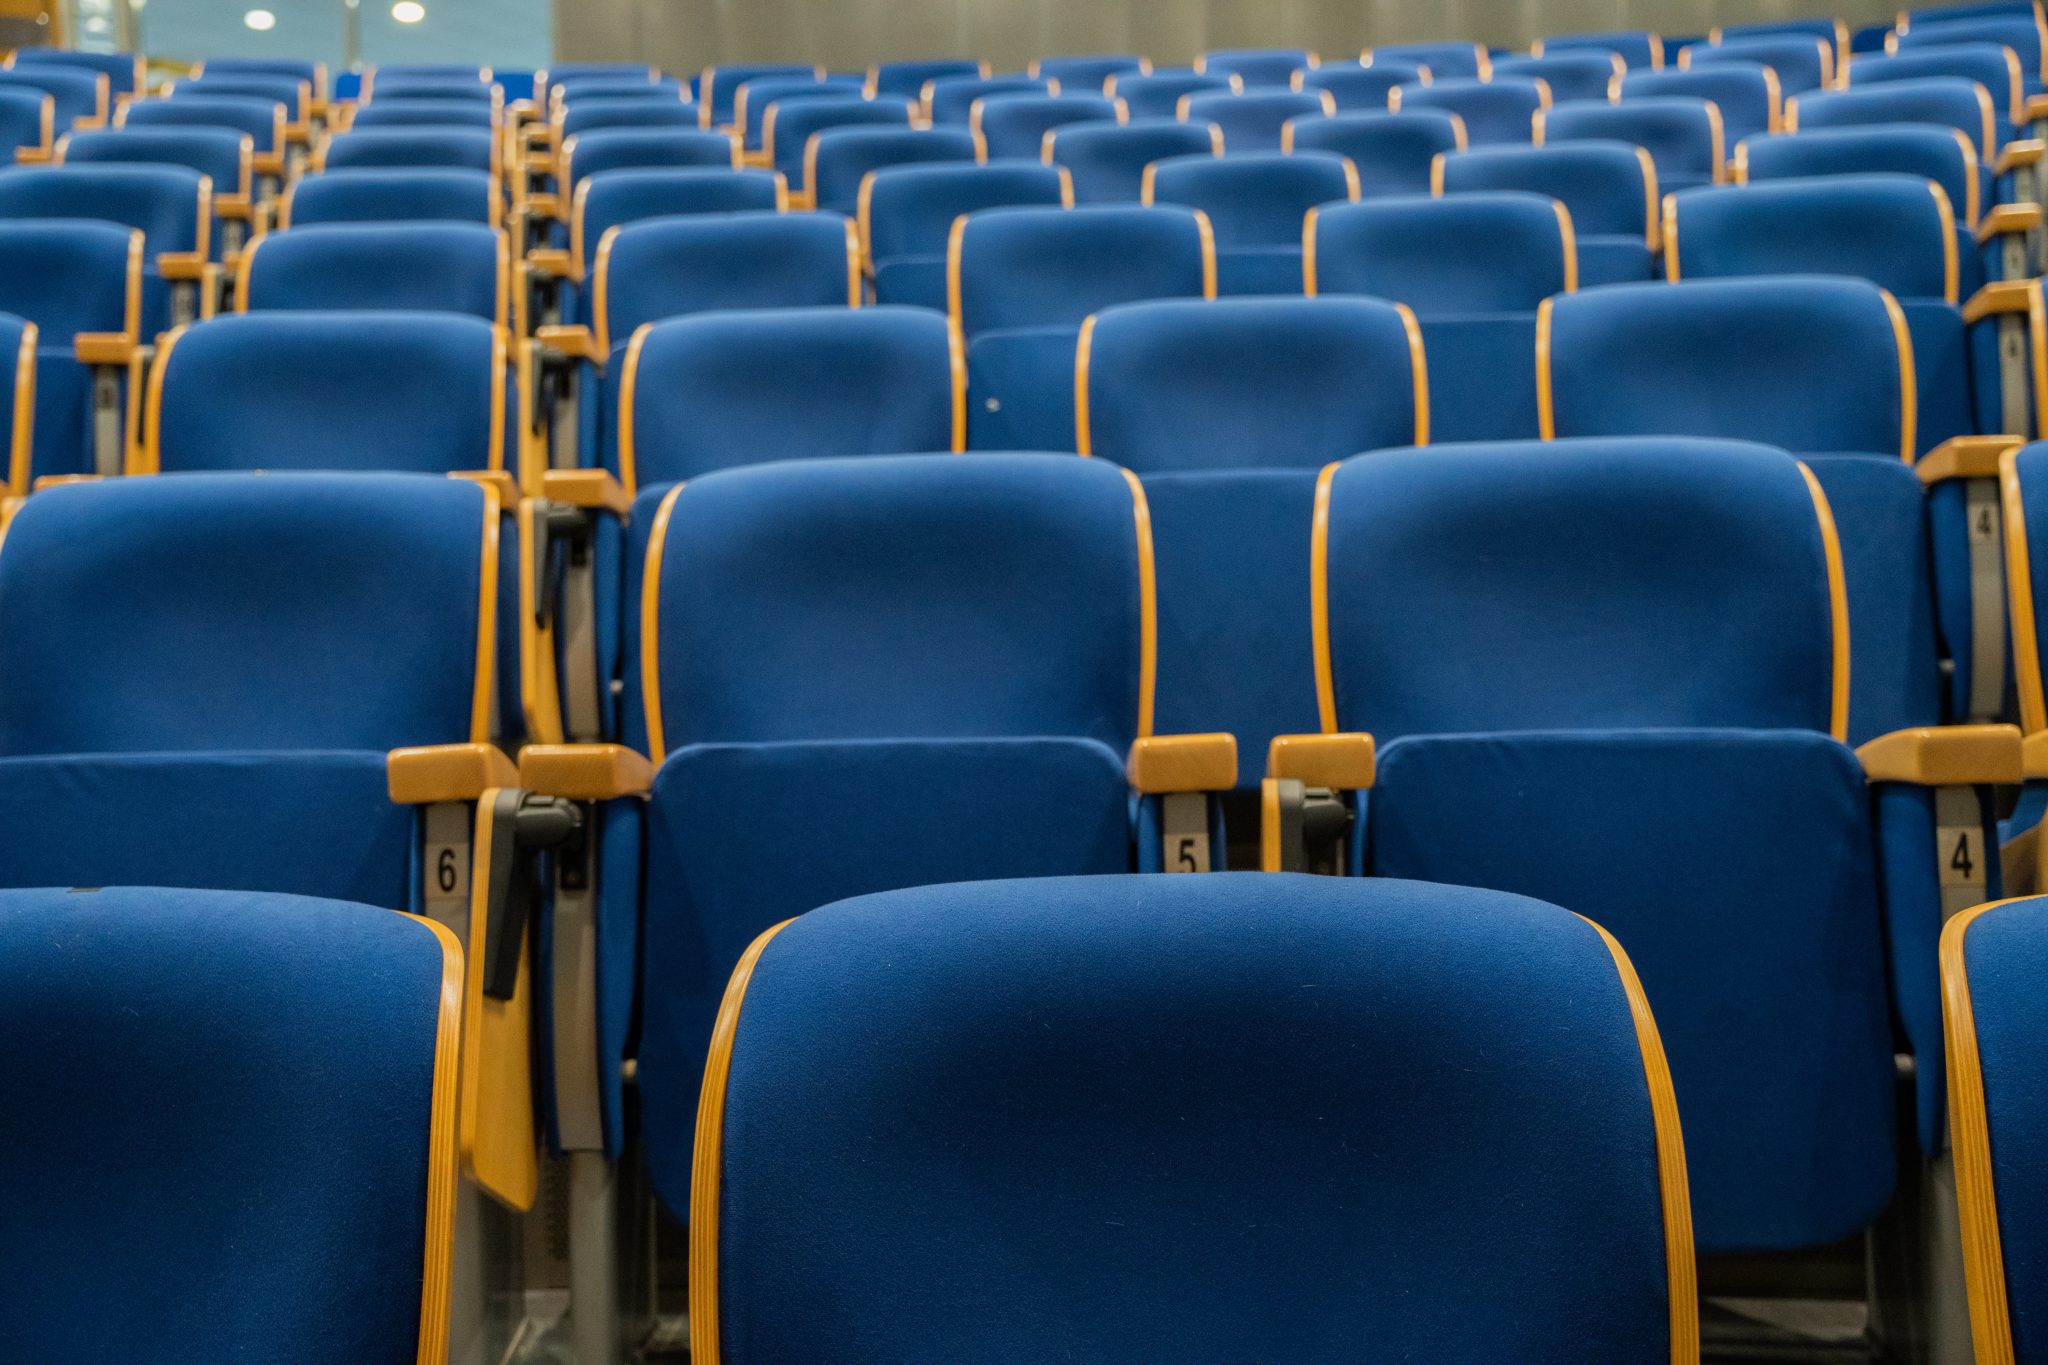 Image of a large, empty auditorium with rows of blue seats. The venue could host concerts, lectures, conferences, or movie screenings. This photo captures the anticipation of a cultural event, performance space, and public gathering. Ideal for event and v